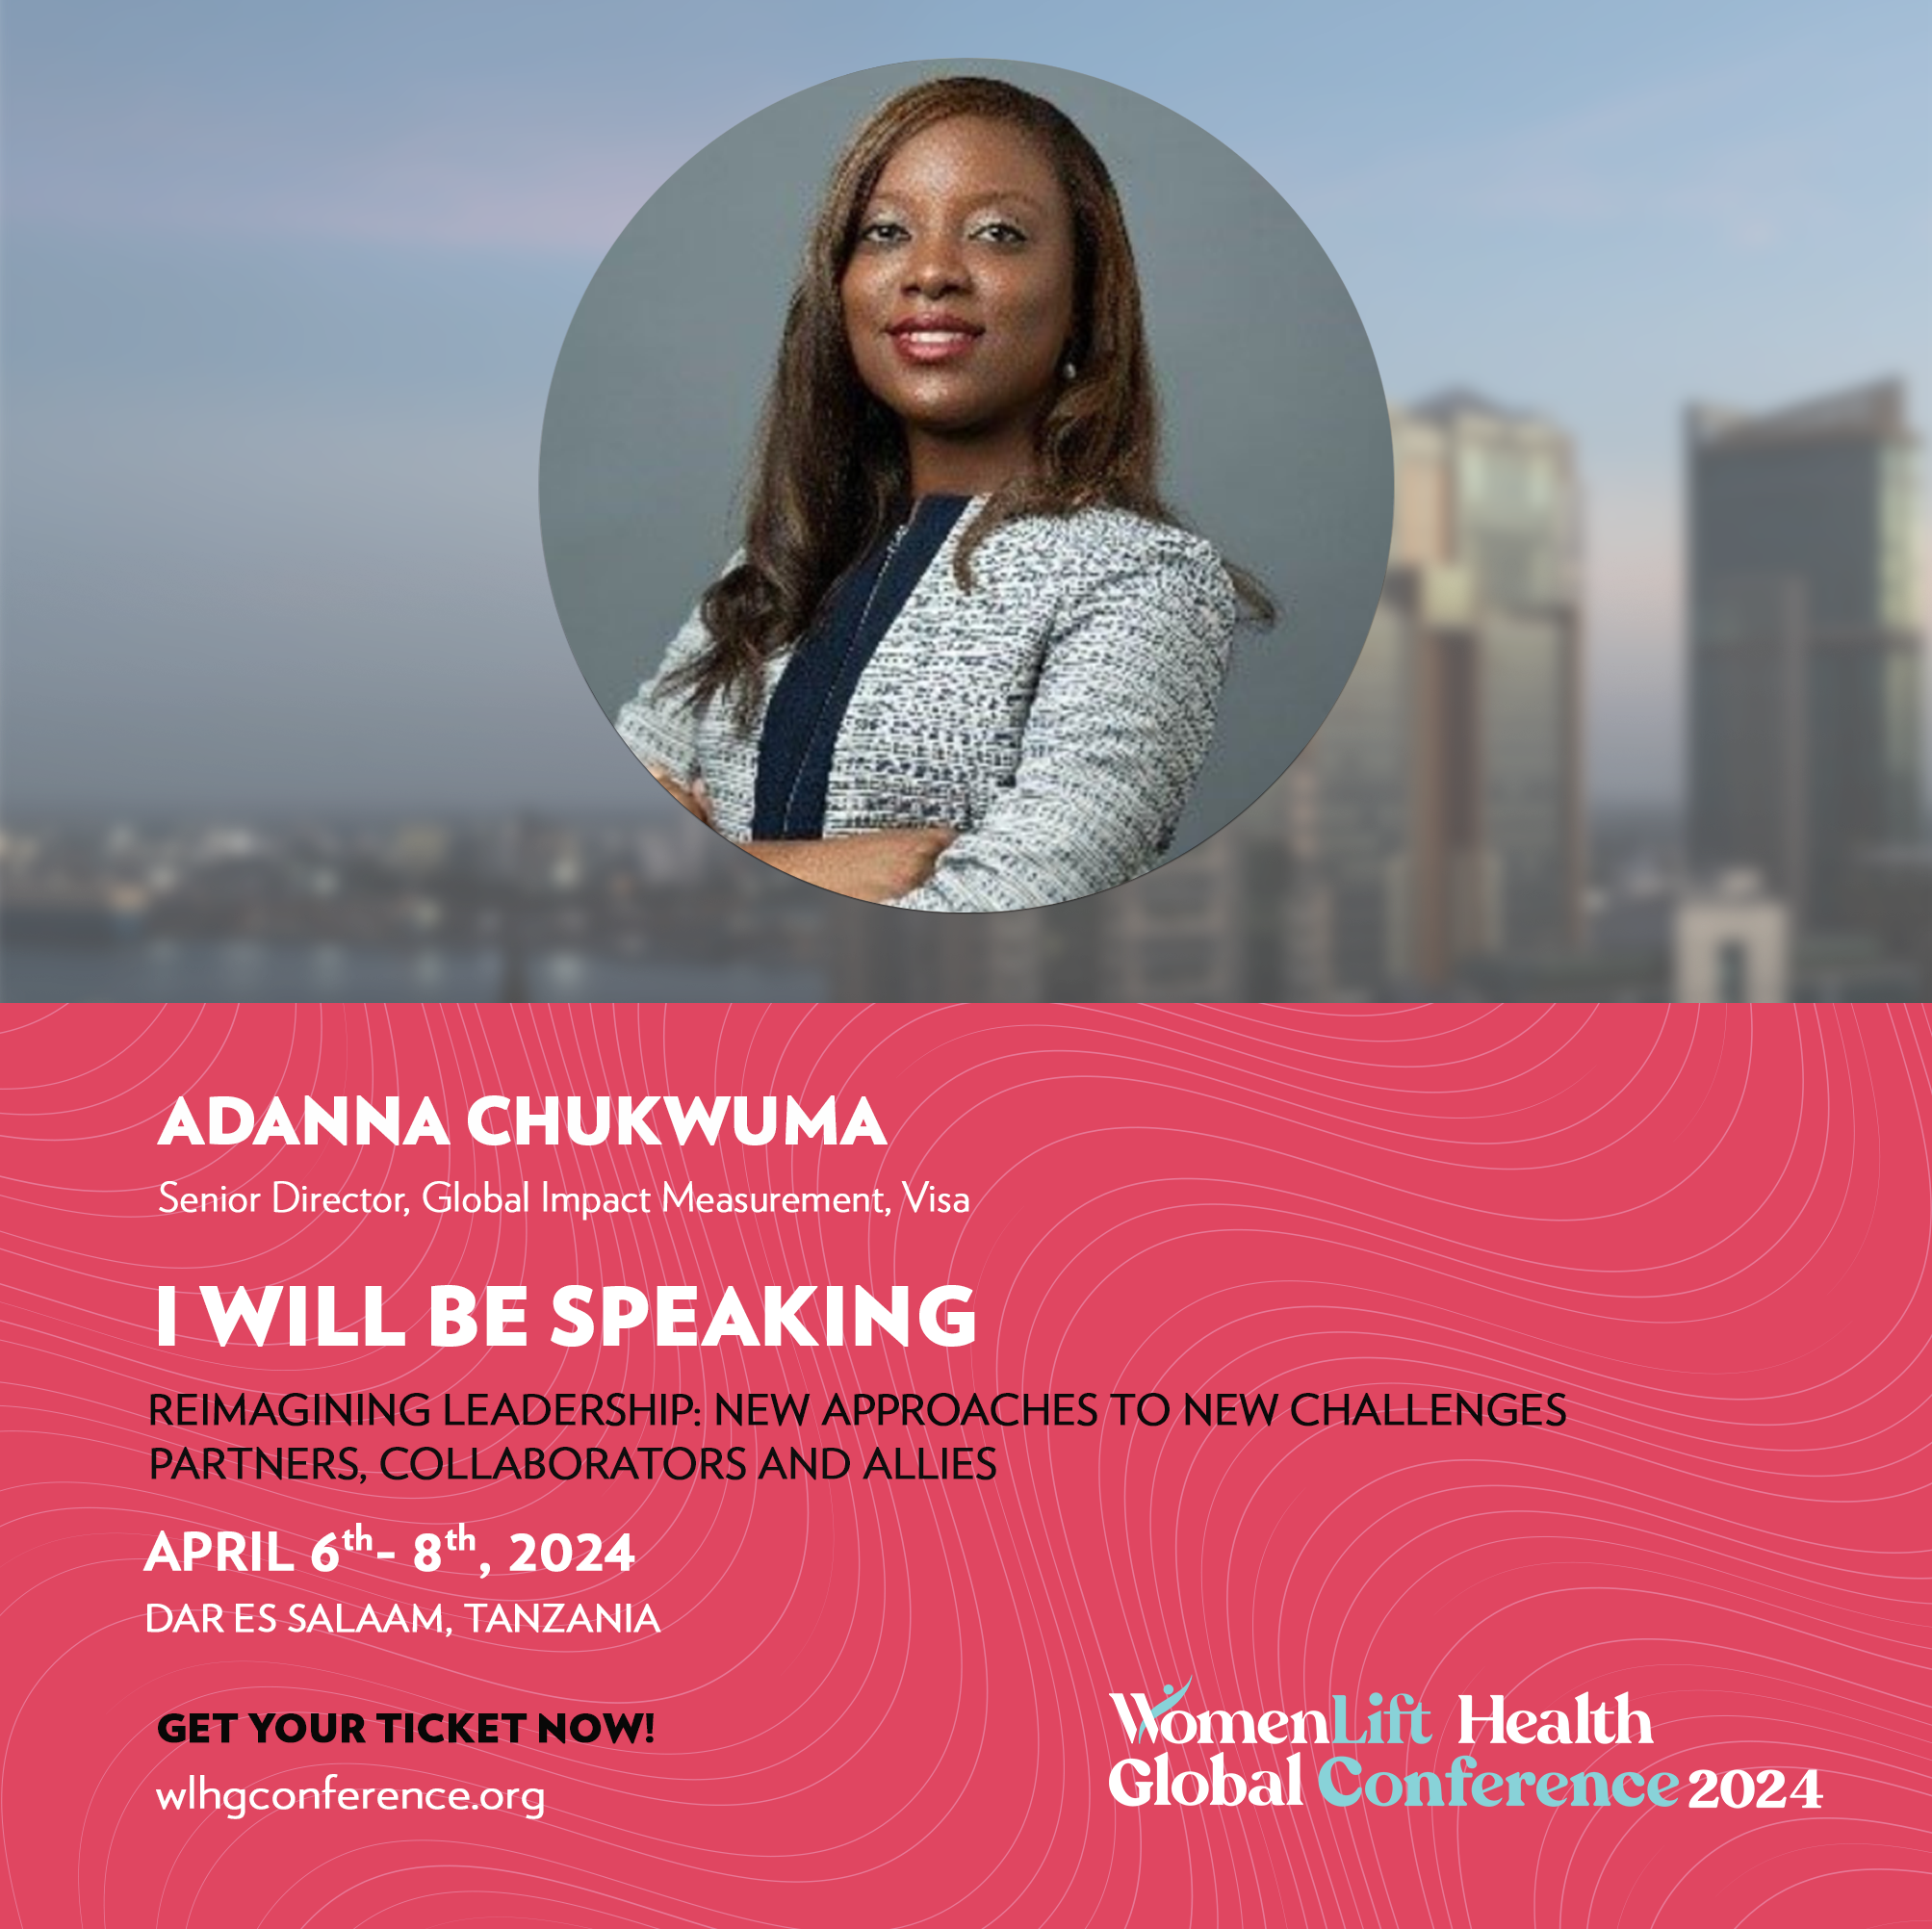 Adanna Chukwuma will be speaking at the WomenLift Health Global Conference 2024